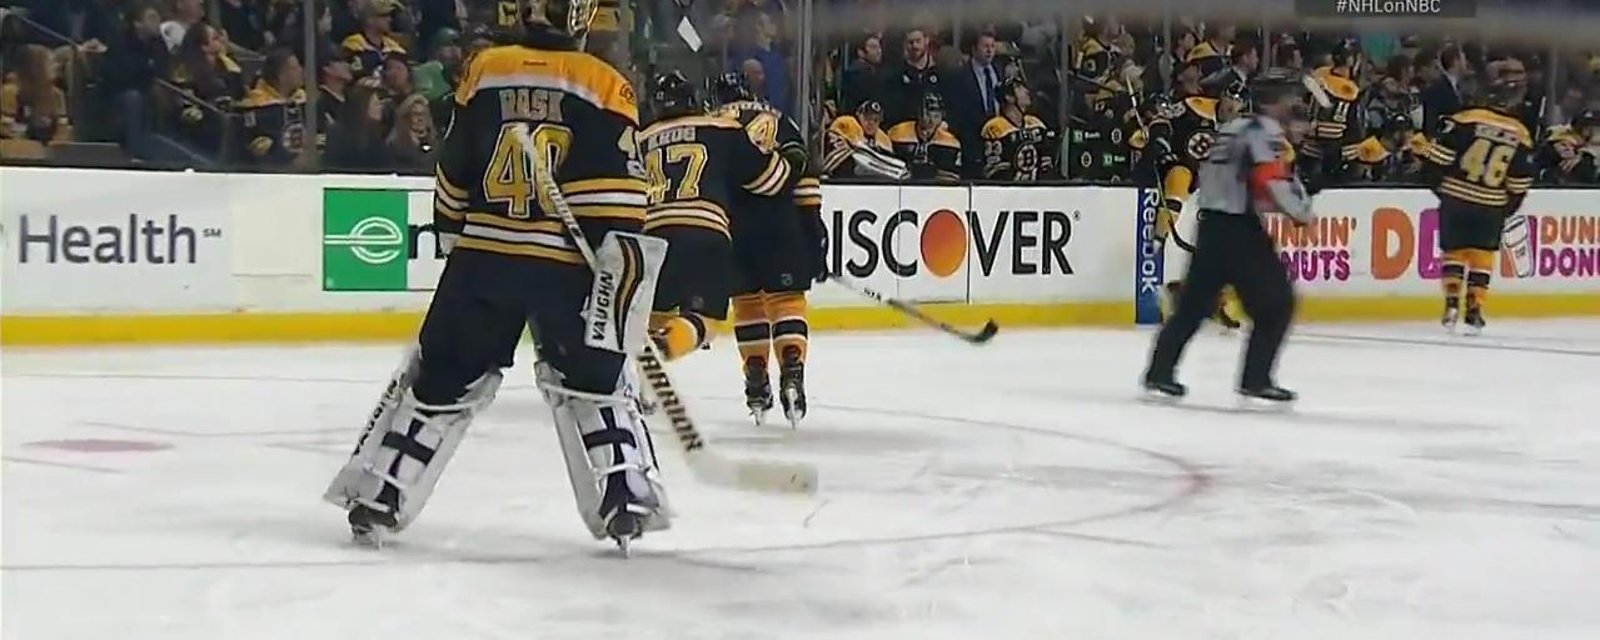 McQuaid injured, Rask and Krug to the rescue! 